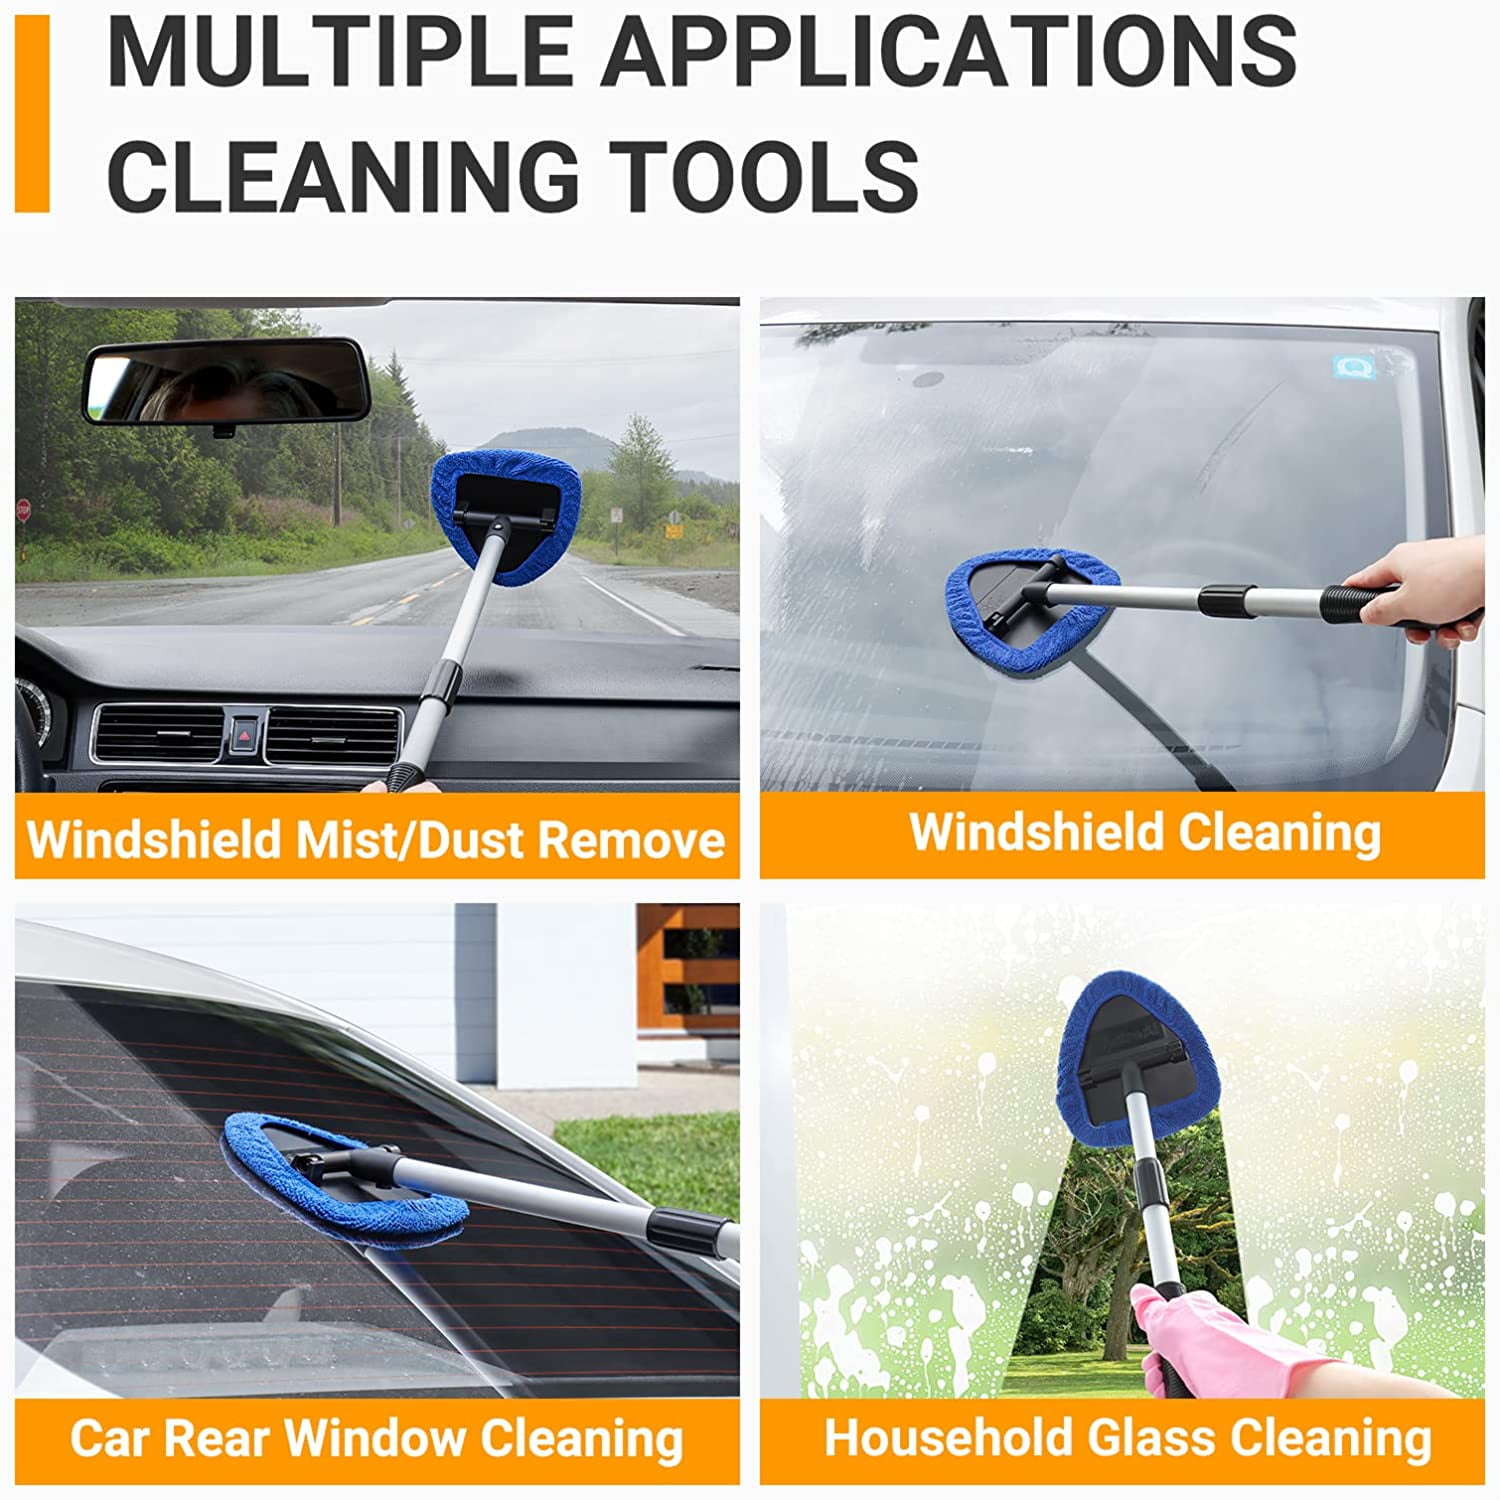  BOUTICOL Car Windshield Cleaning Tool Bonnets 20 Pack Car Care  Microfiber Cloths for Windshield Cleaner Tool, Windshield Cleaner Wand  Replaceable Glass Cleaning Bonnets, Fit 5” Plate : Automotive